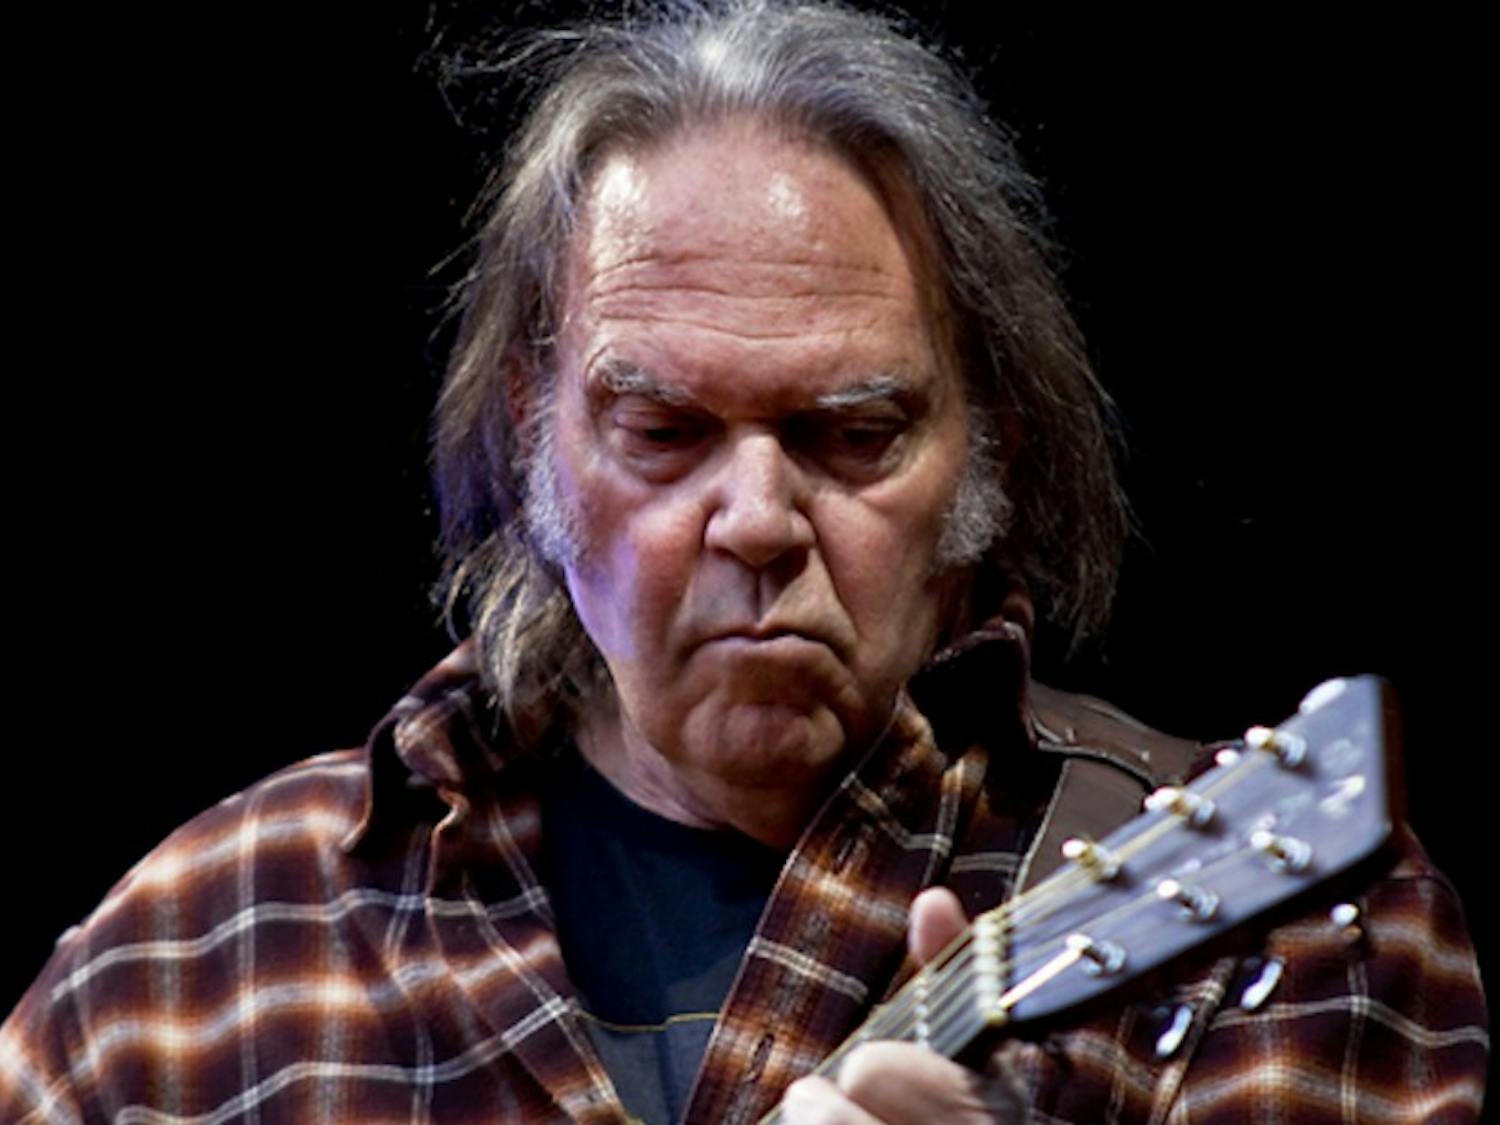 "Hitchhiker" consists of 10 tracks of reworked and unreleased material from the folk rock legend, pictured at a concert in 2009.